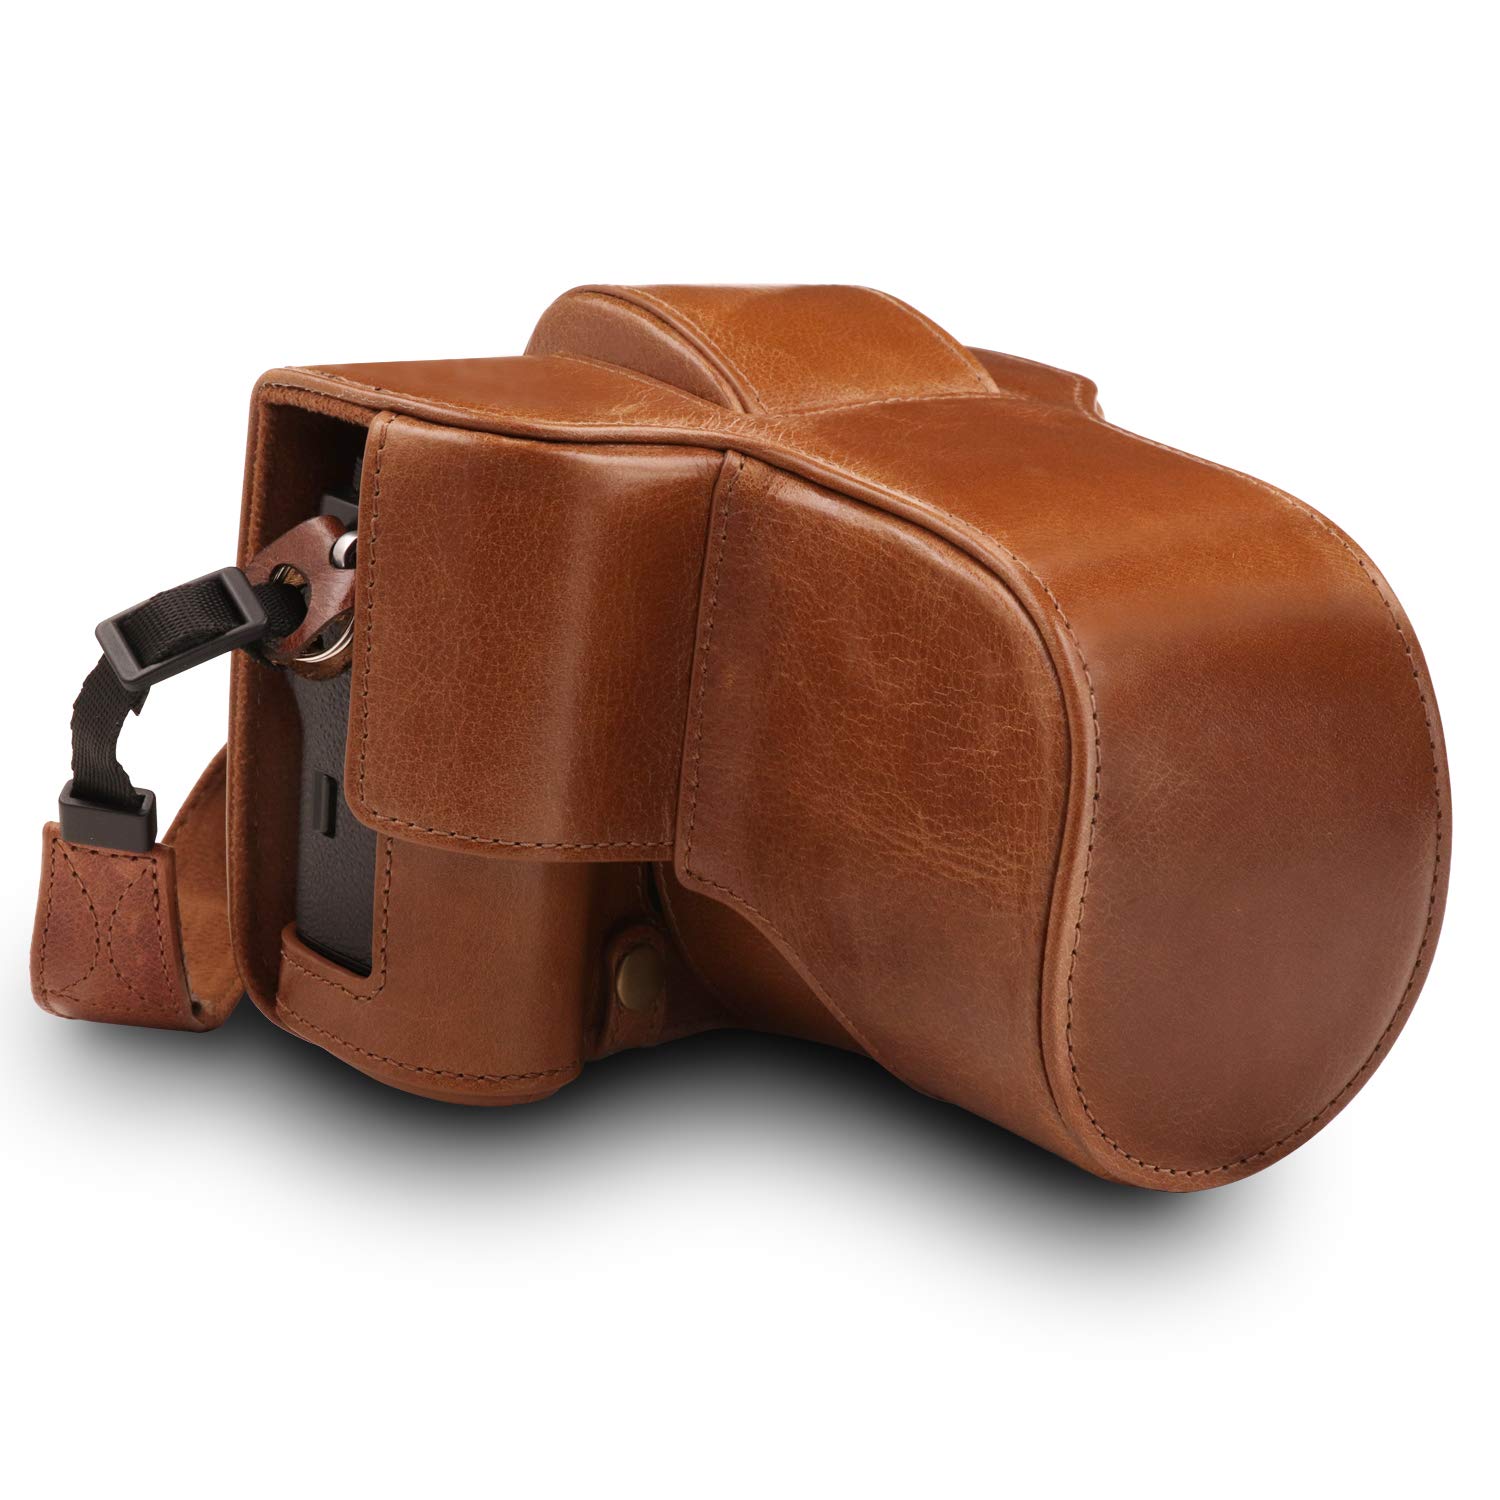 MegaGear Ever Ready Genuine Leather Camera Case Compatible with Fujifilm X-T3 (XF23mm - XF56mm & 18-55mm Lens)